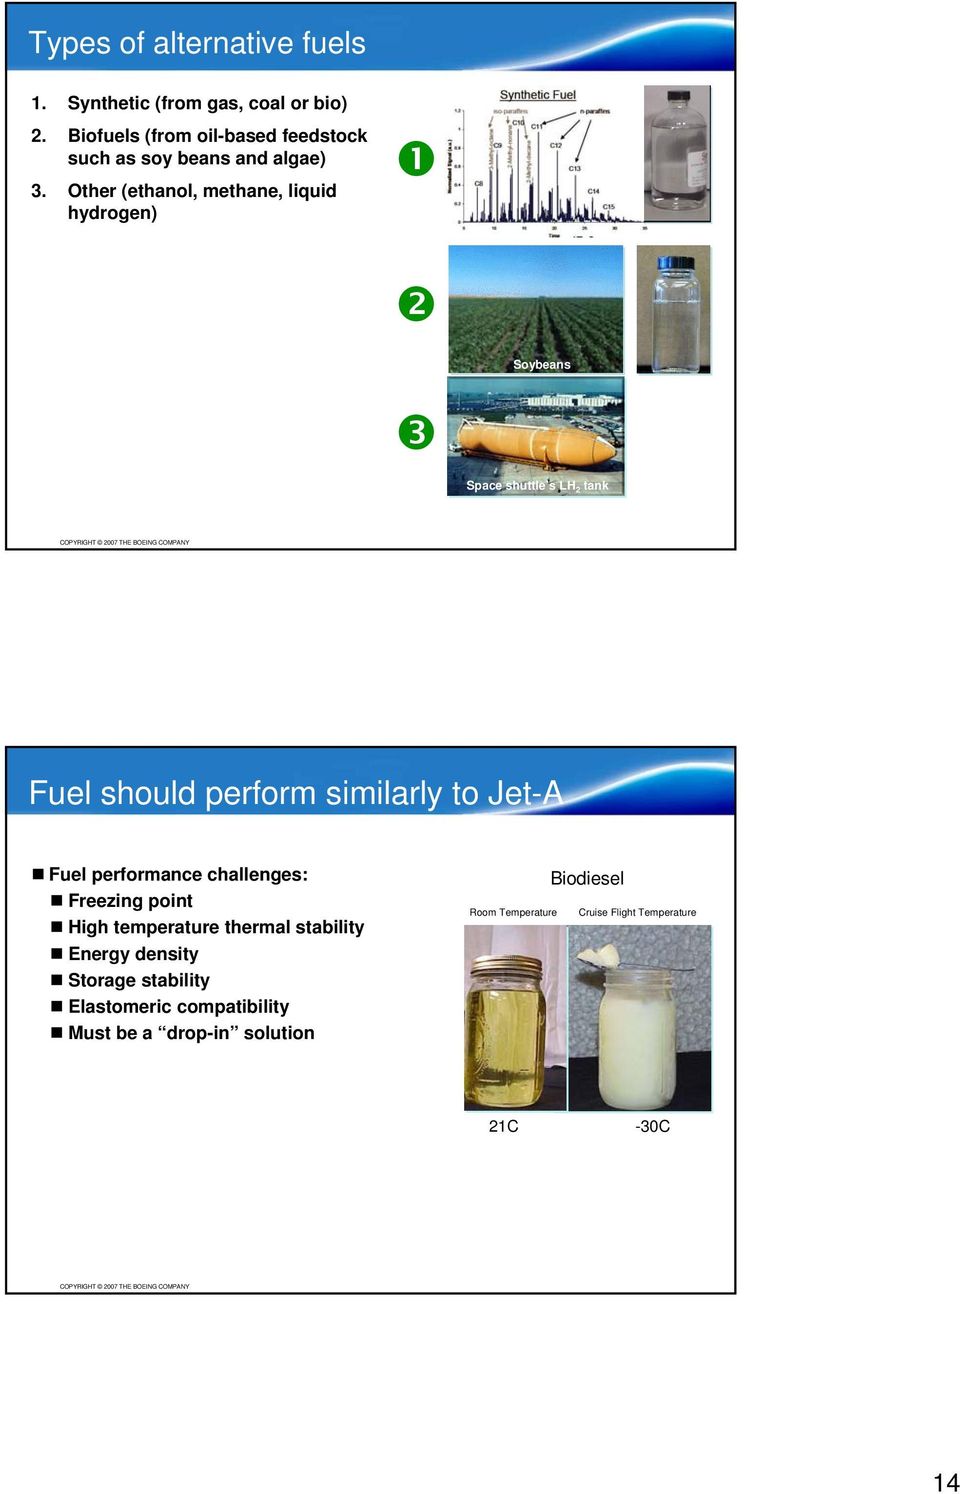 Other (ethanol, methane, liquid hydrogen) Soybeans Space shuttle s LH 2 tank Fuel should perform similarly to Jet-A